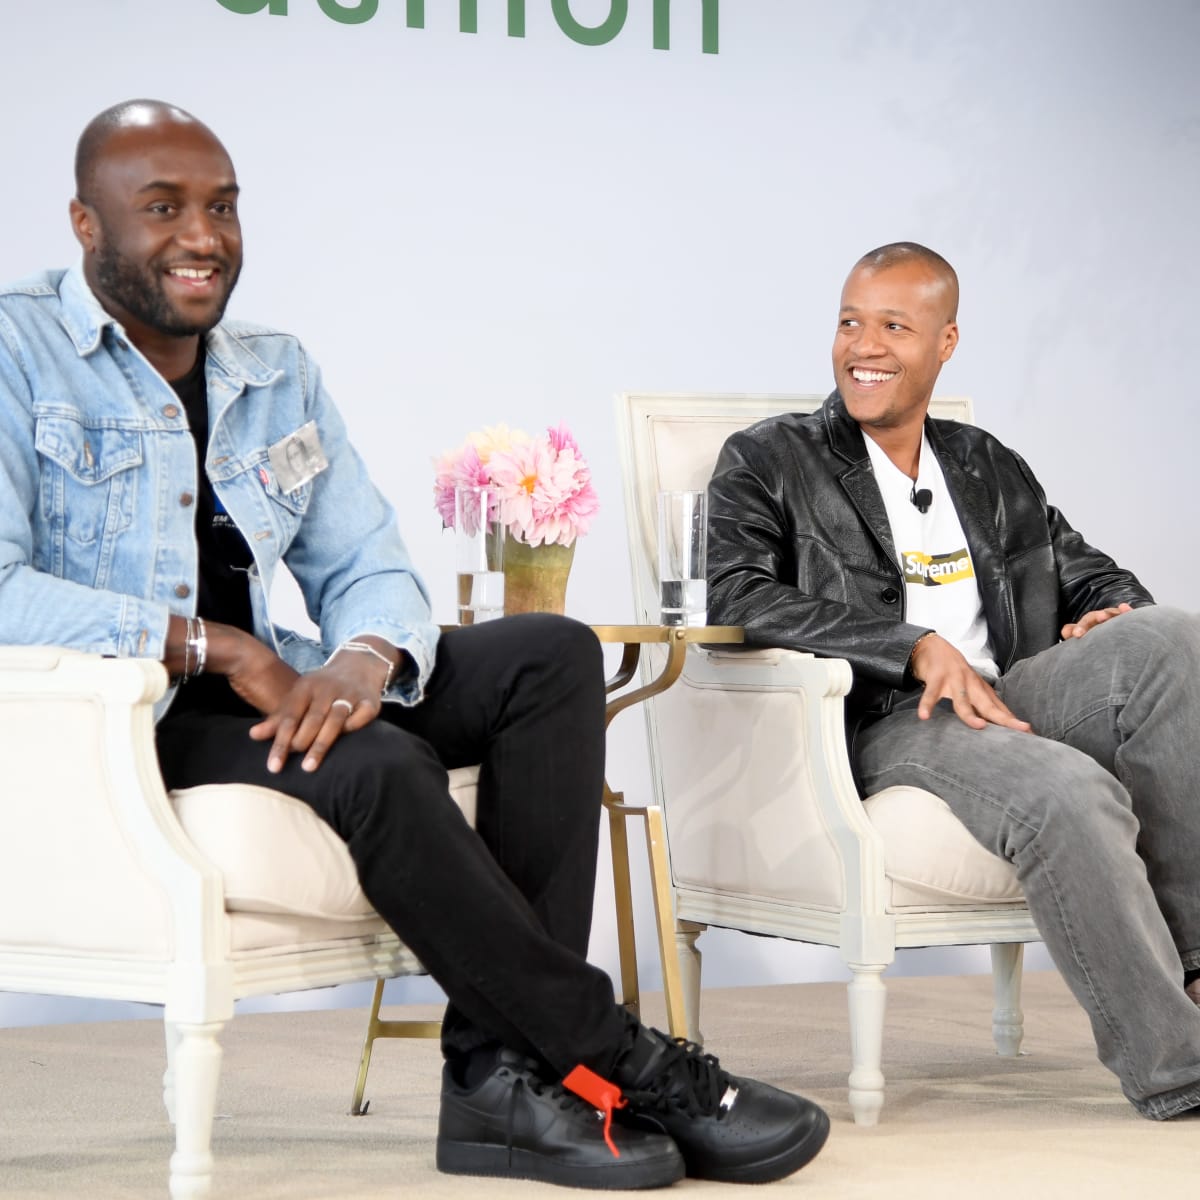 Virgil Abloh and sneakers, a love story and success